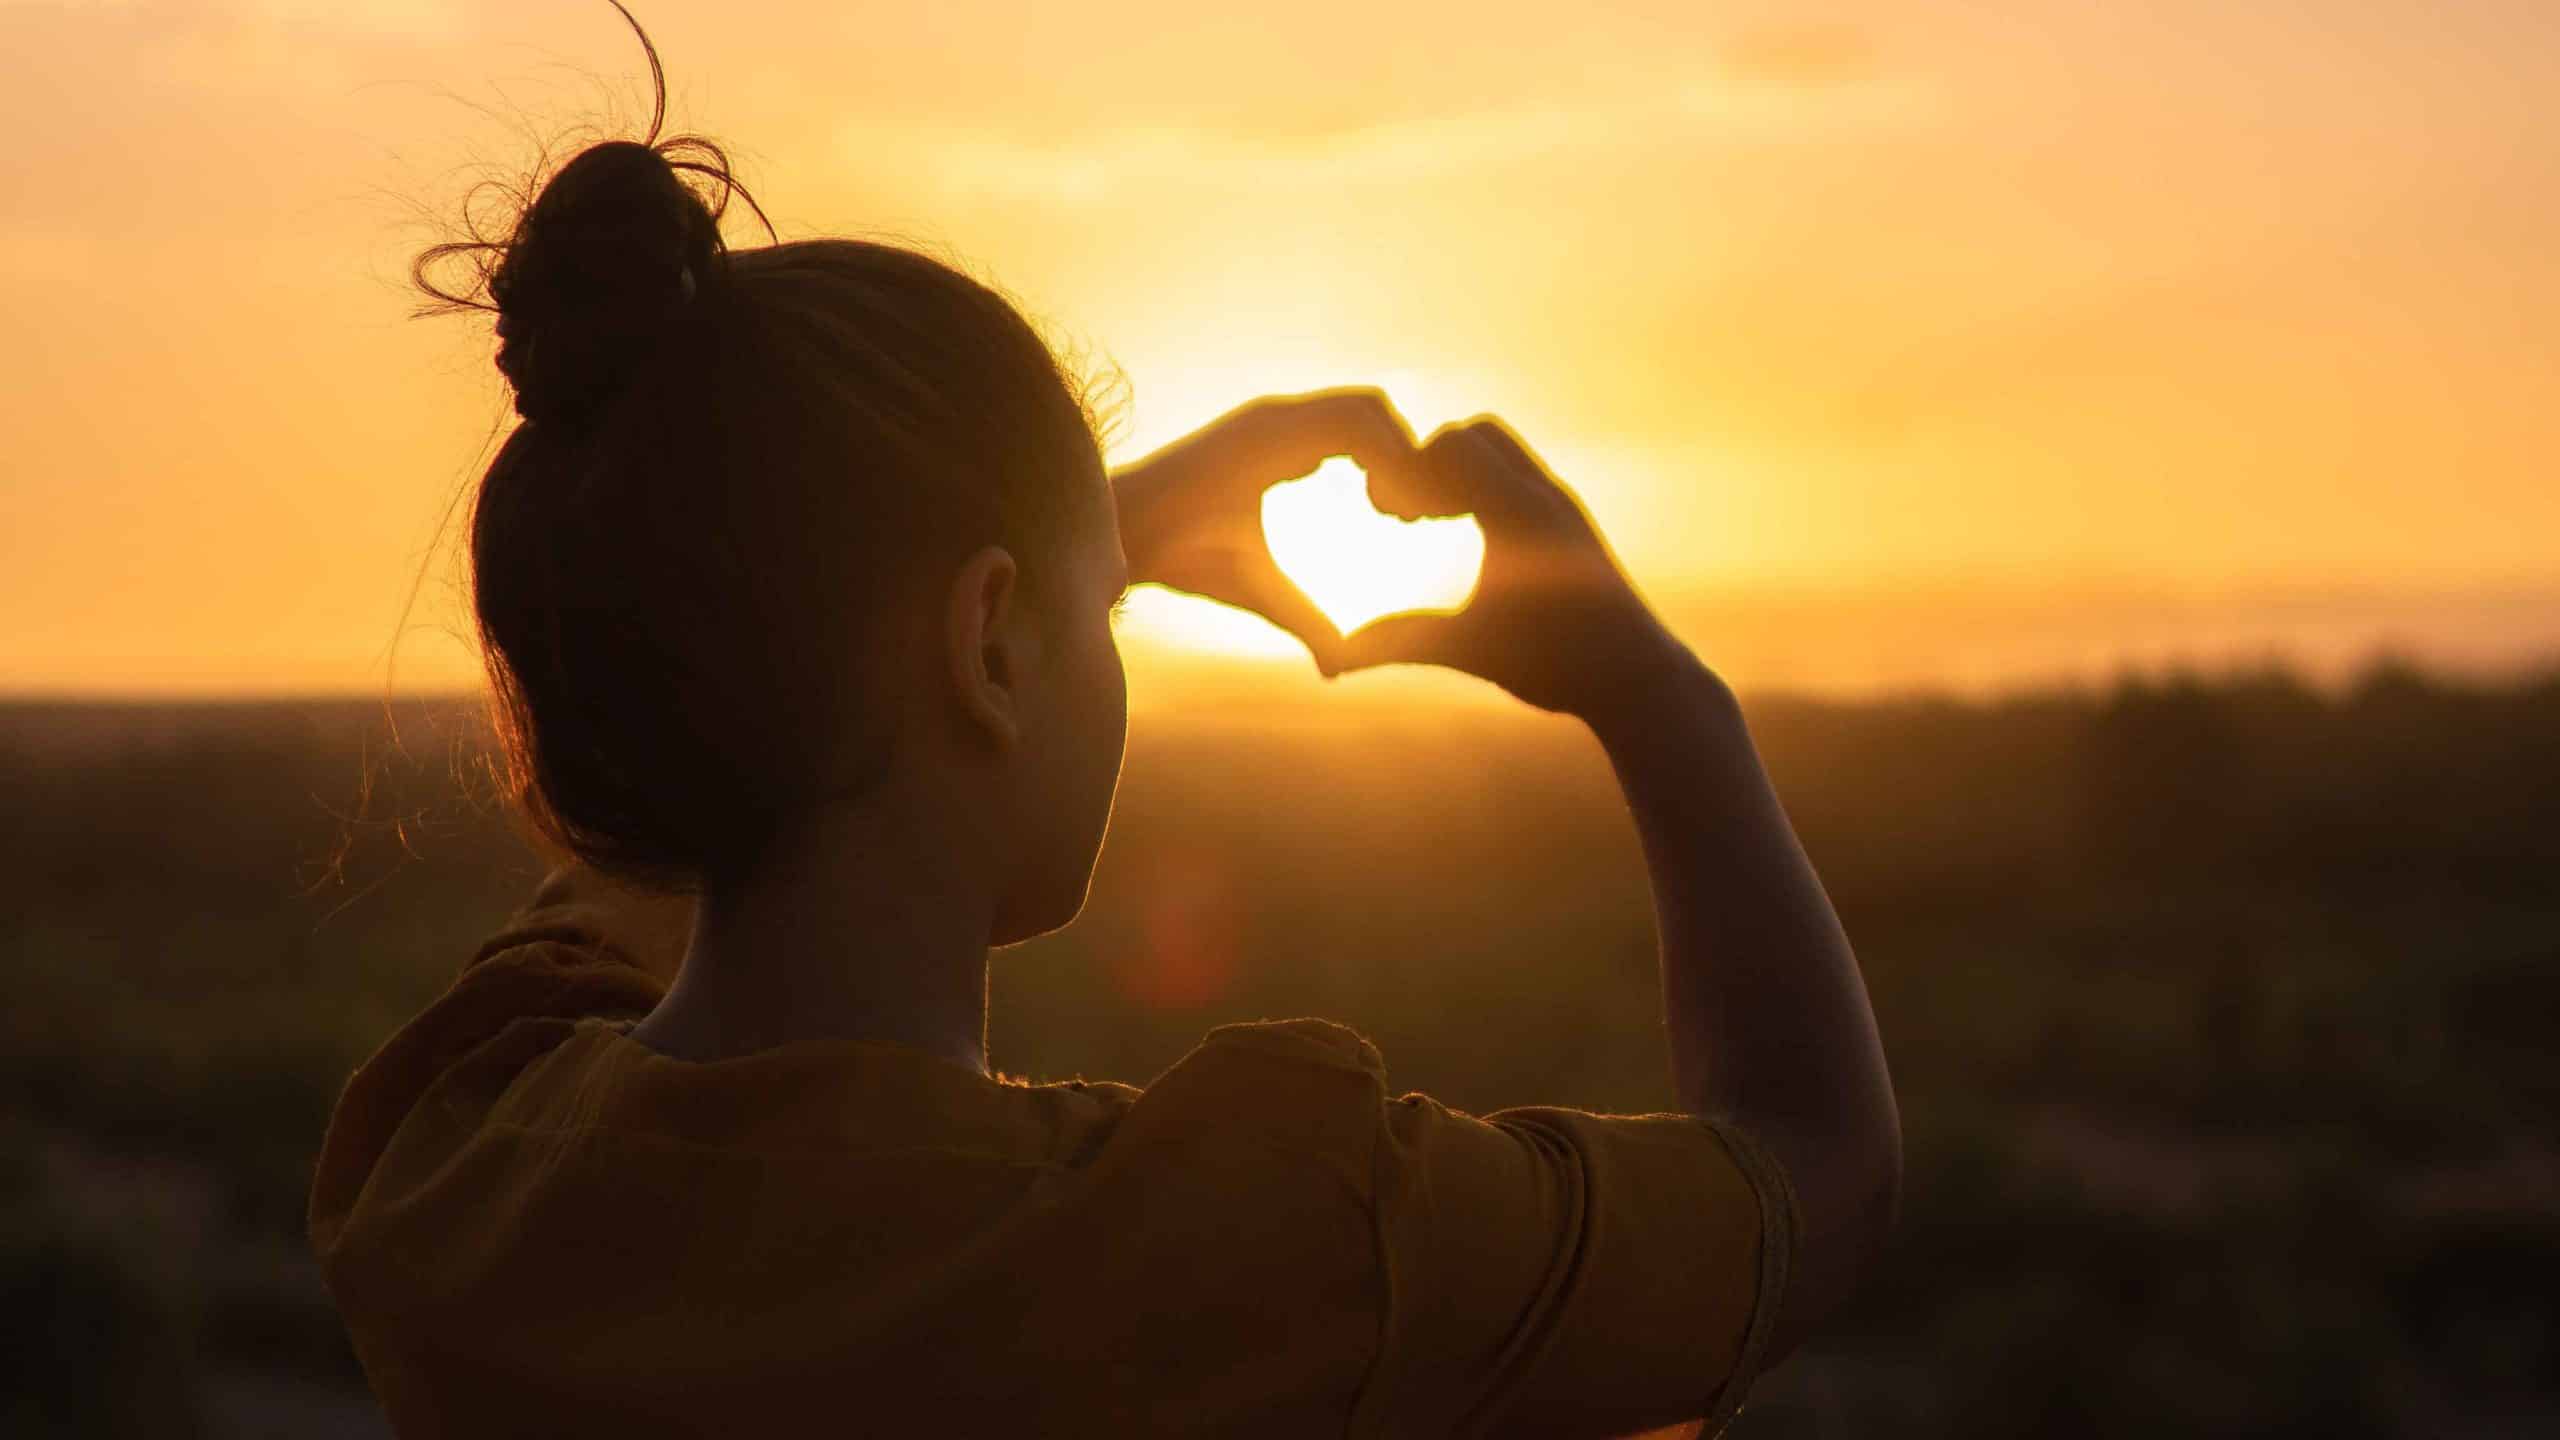 woman makes heart shape with hands against sunset